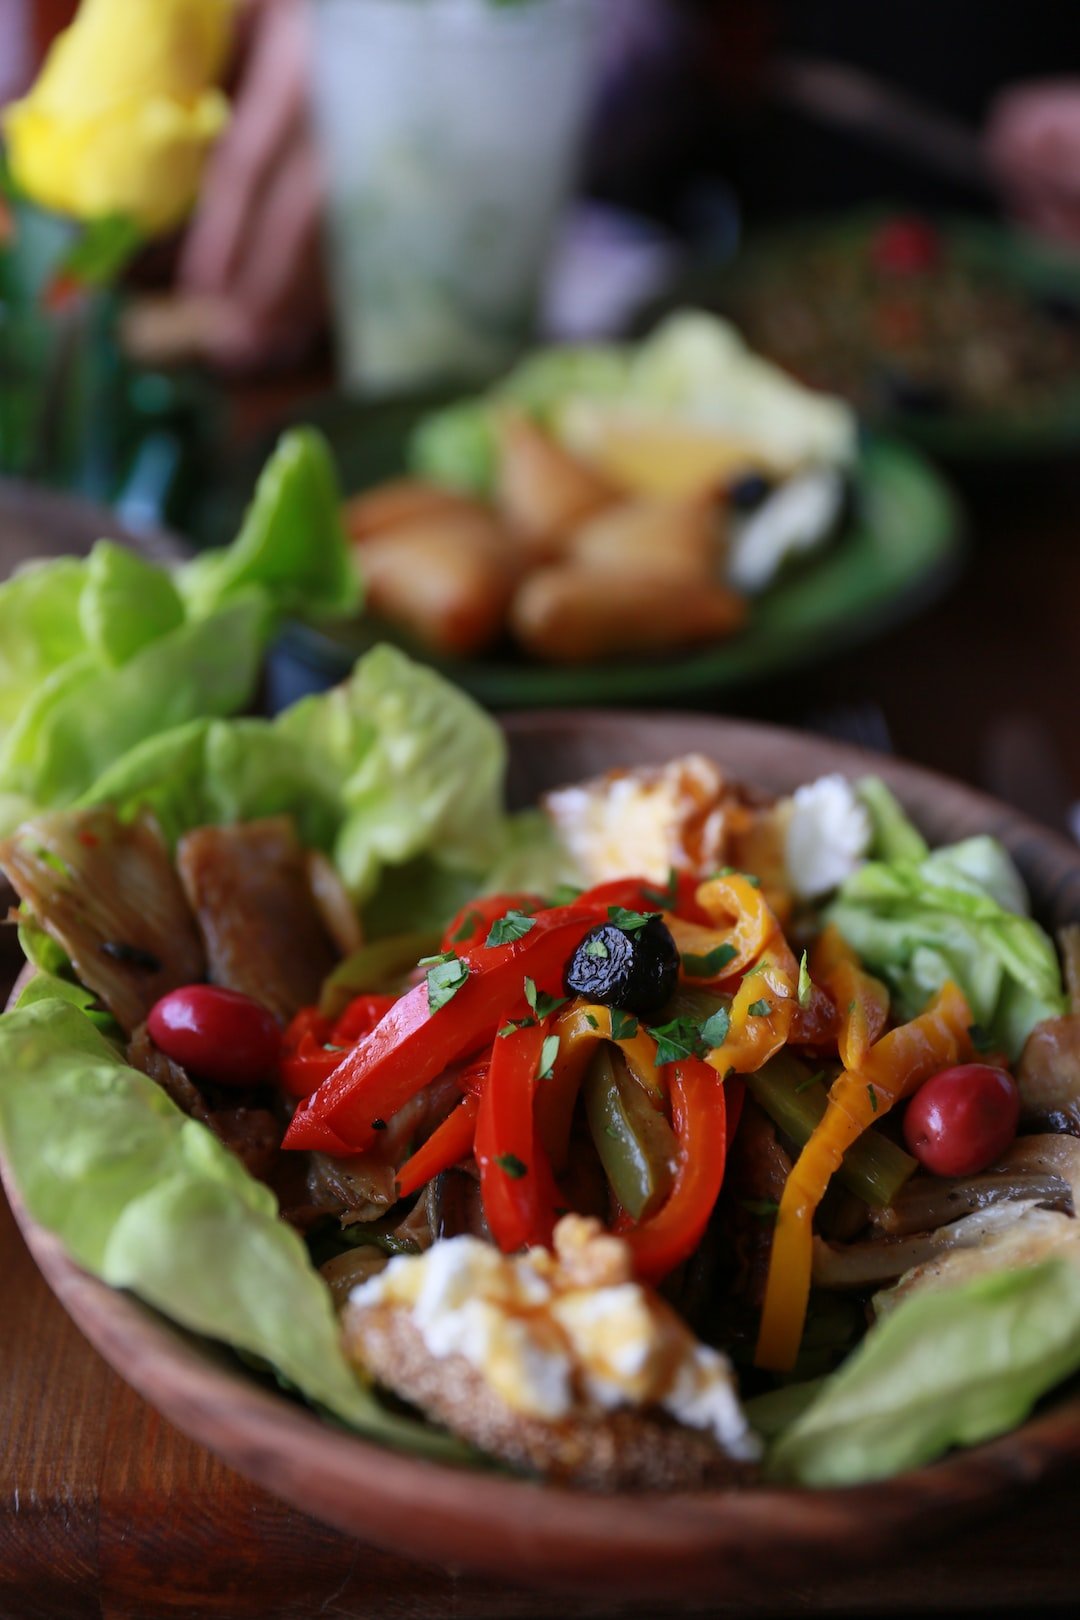 Delicious and Nutritious Vegan Salad Recipes to Satisfy Your Taste Buds